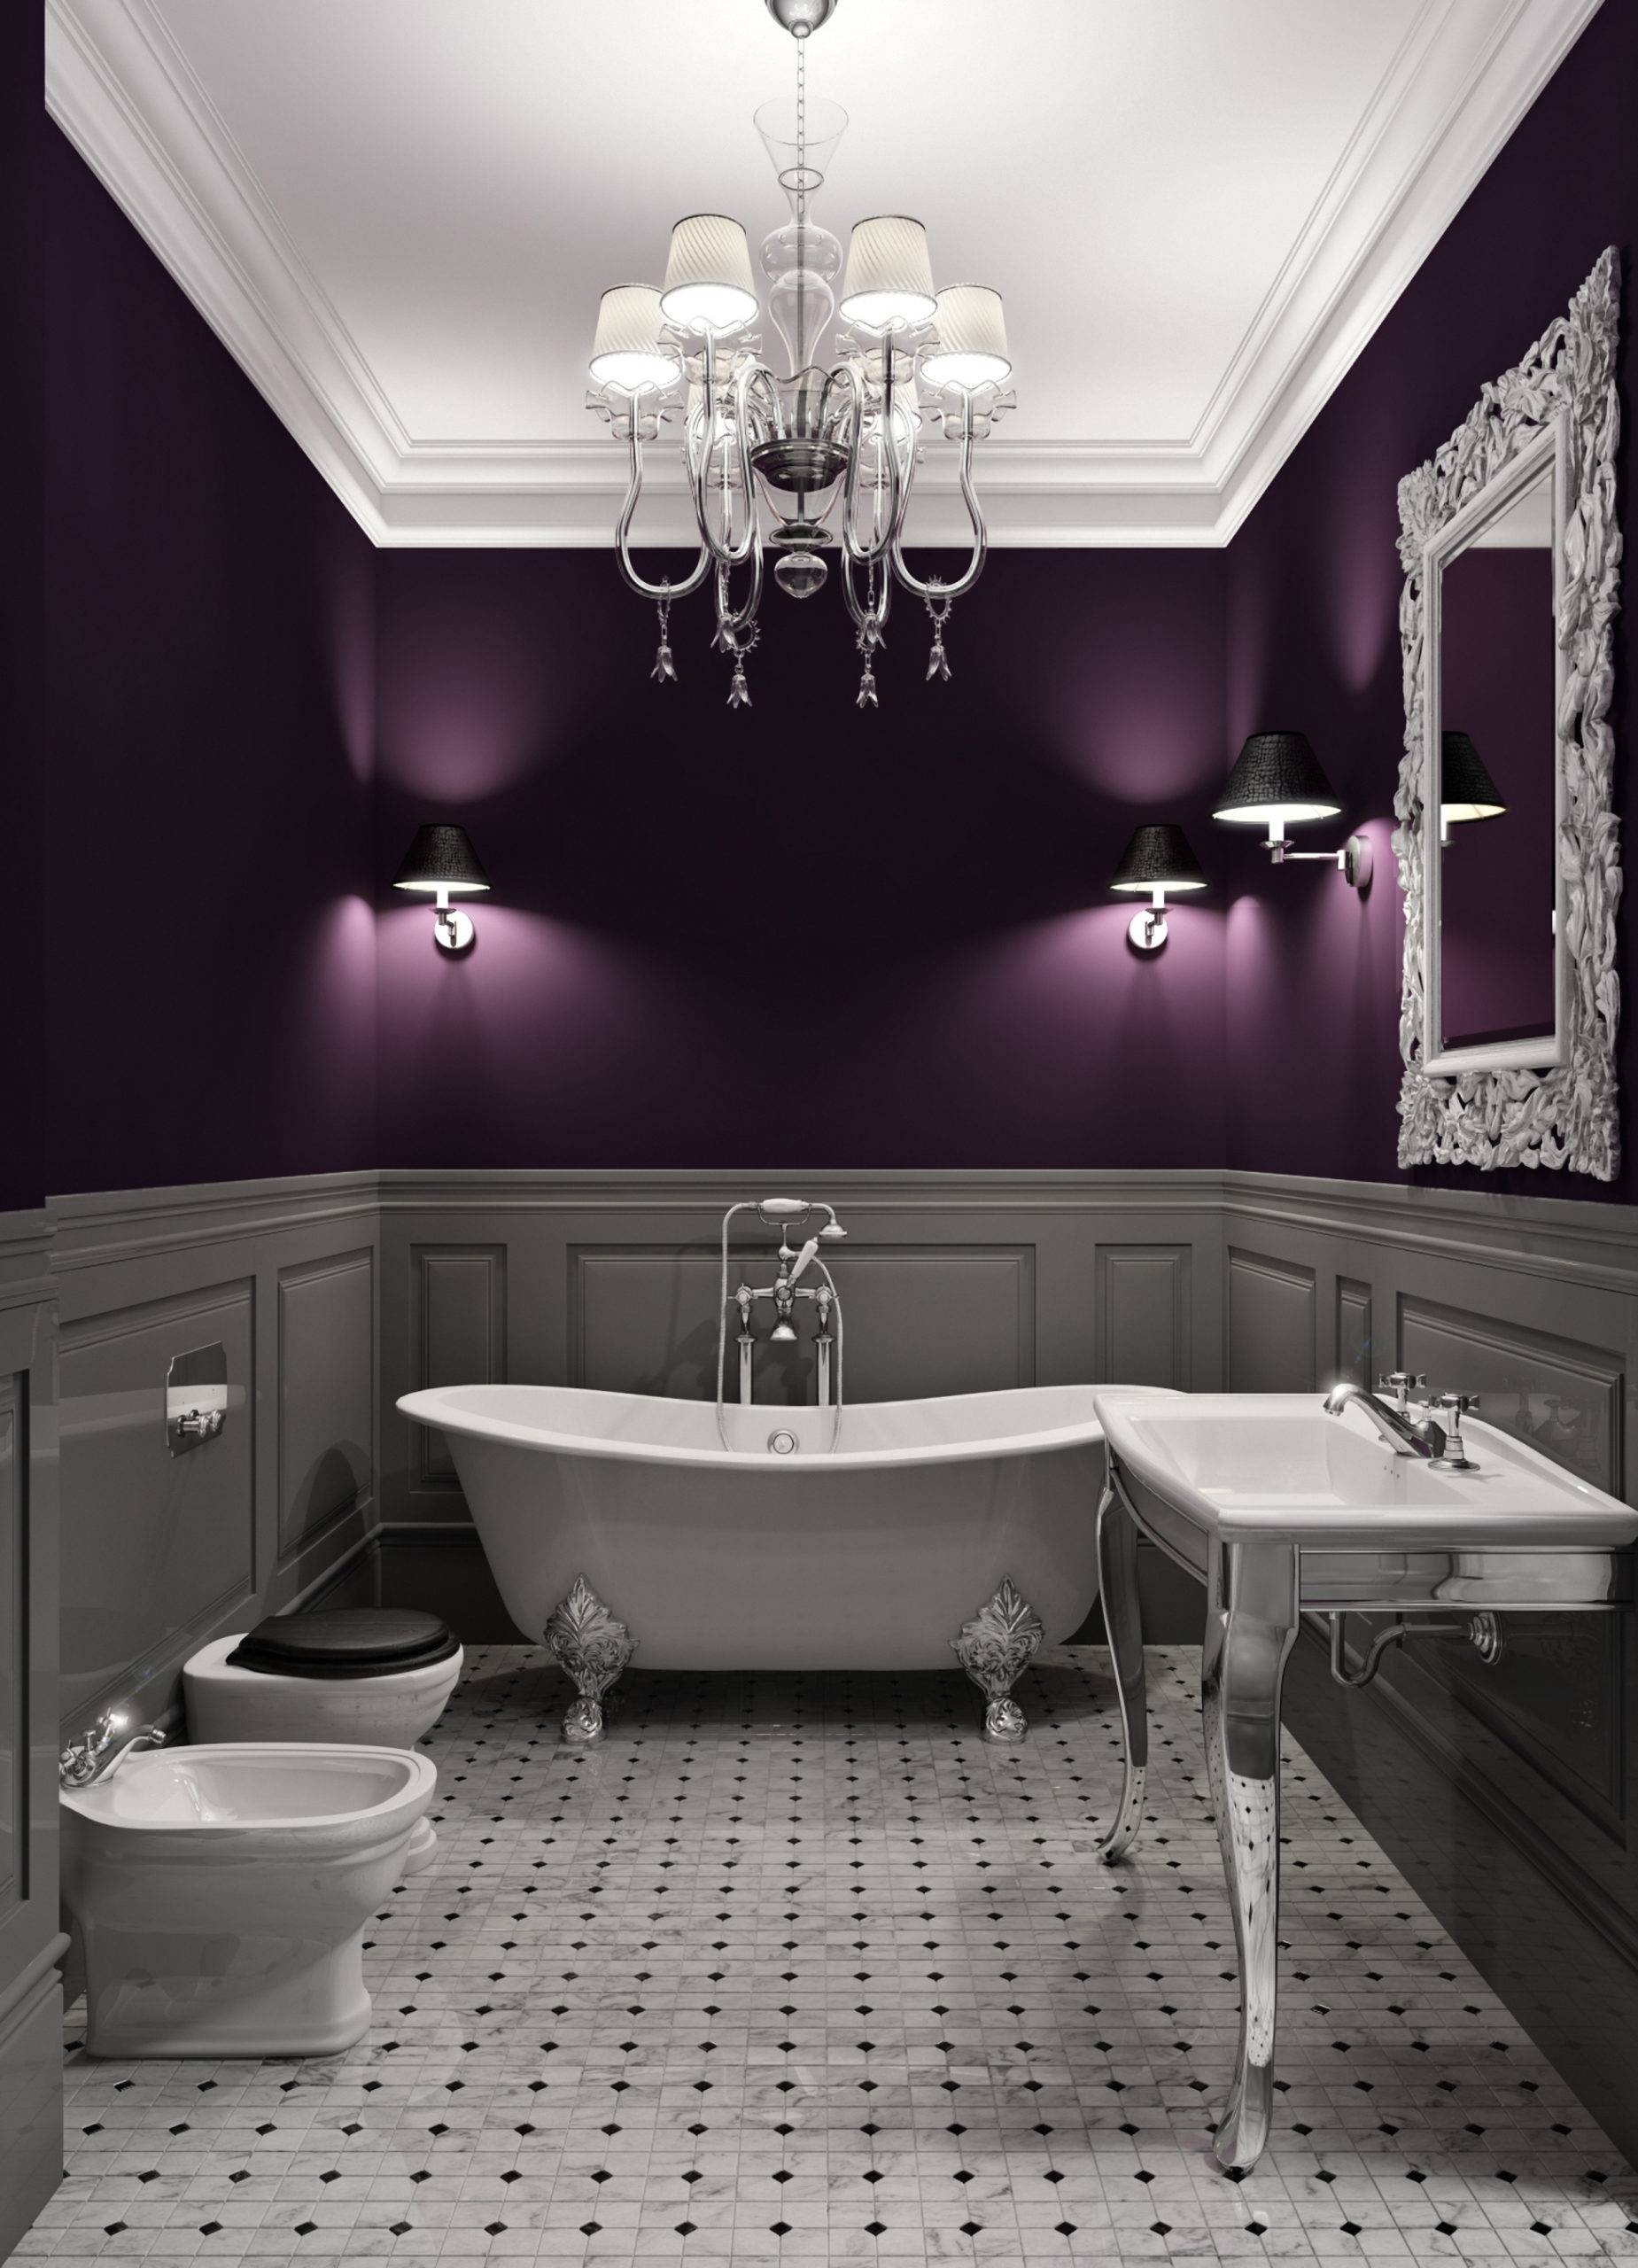 Elegant bathroom with chandelier and purple wall with grey wainscoting